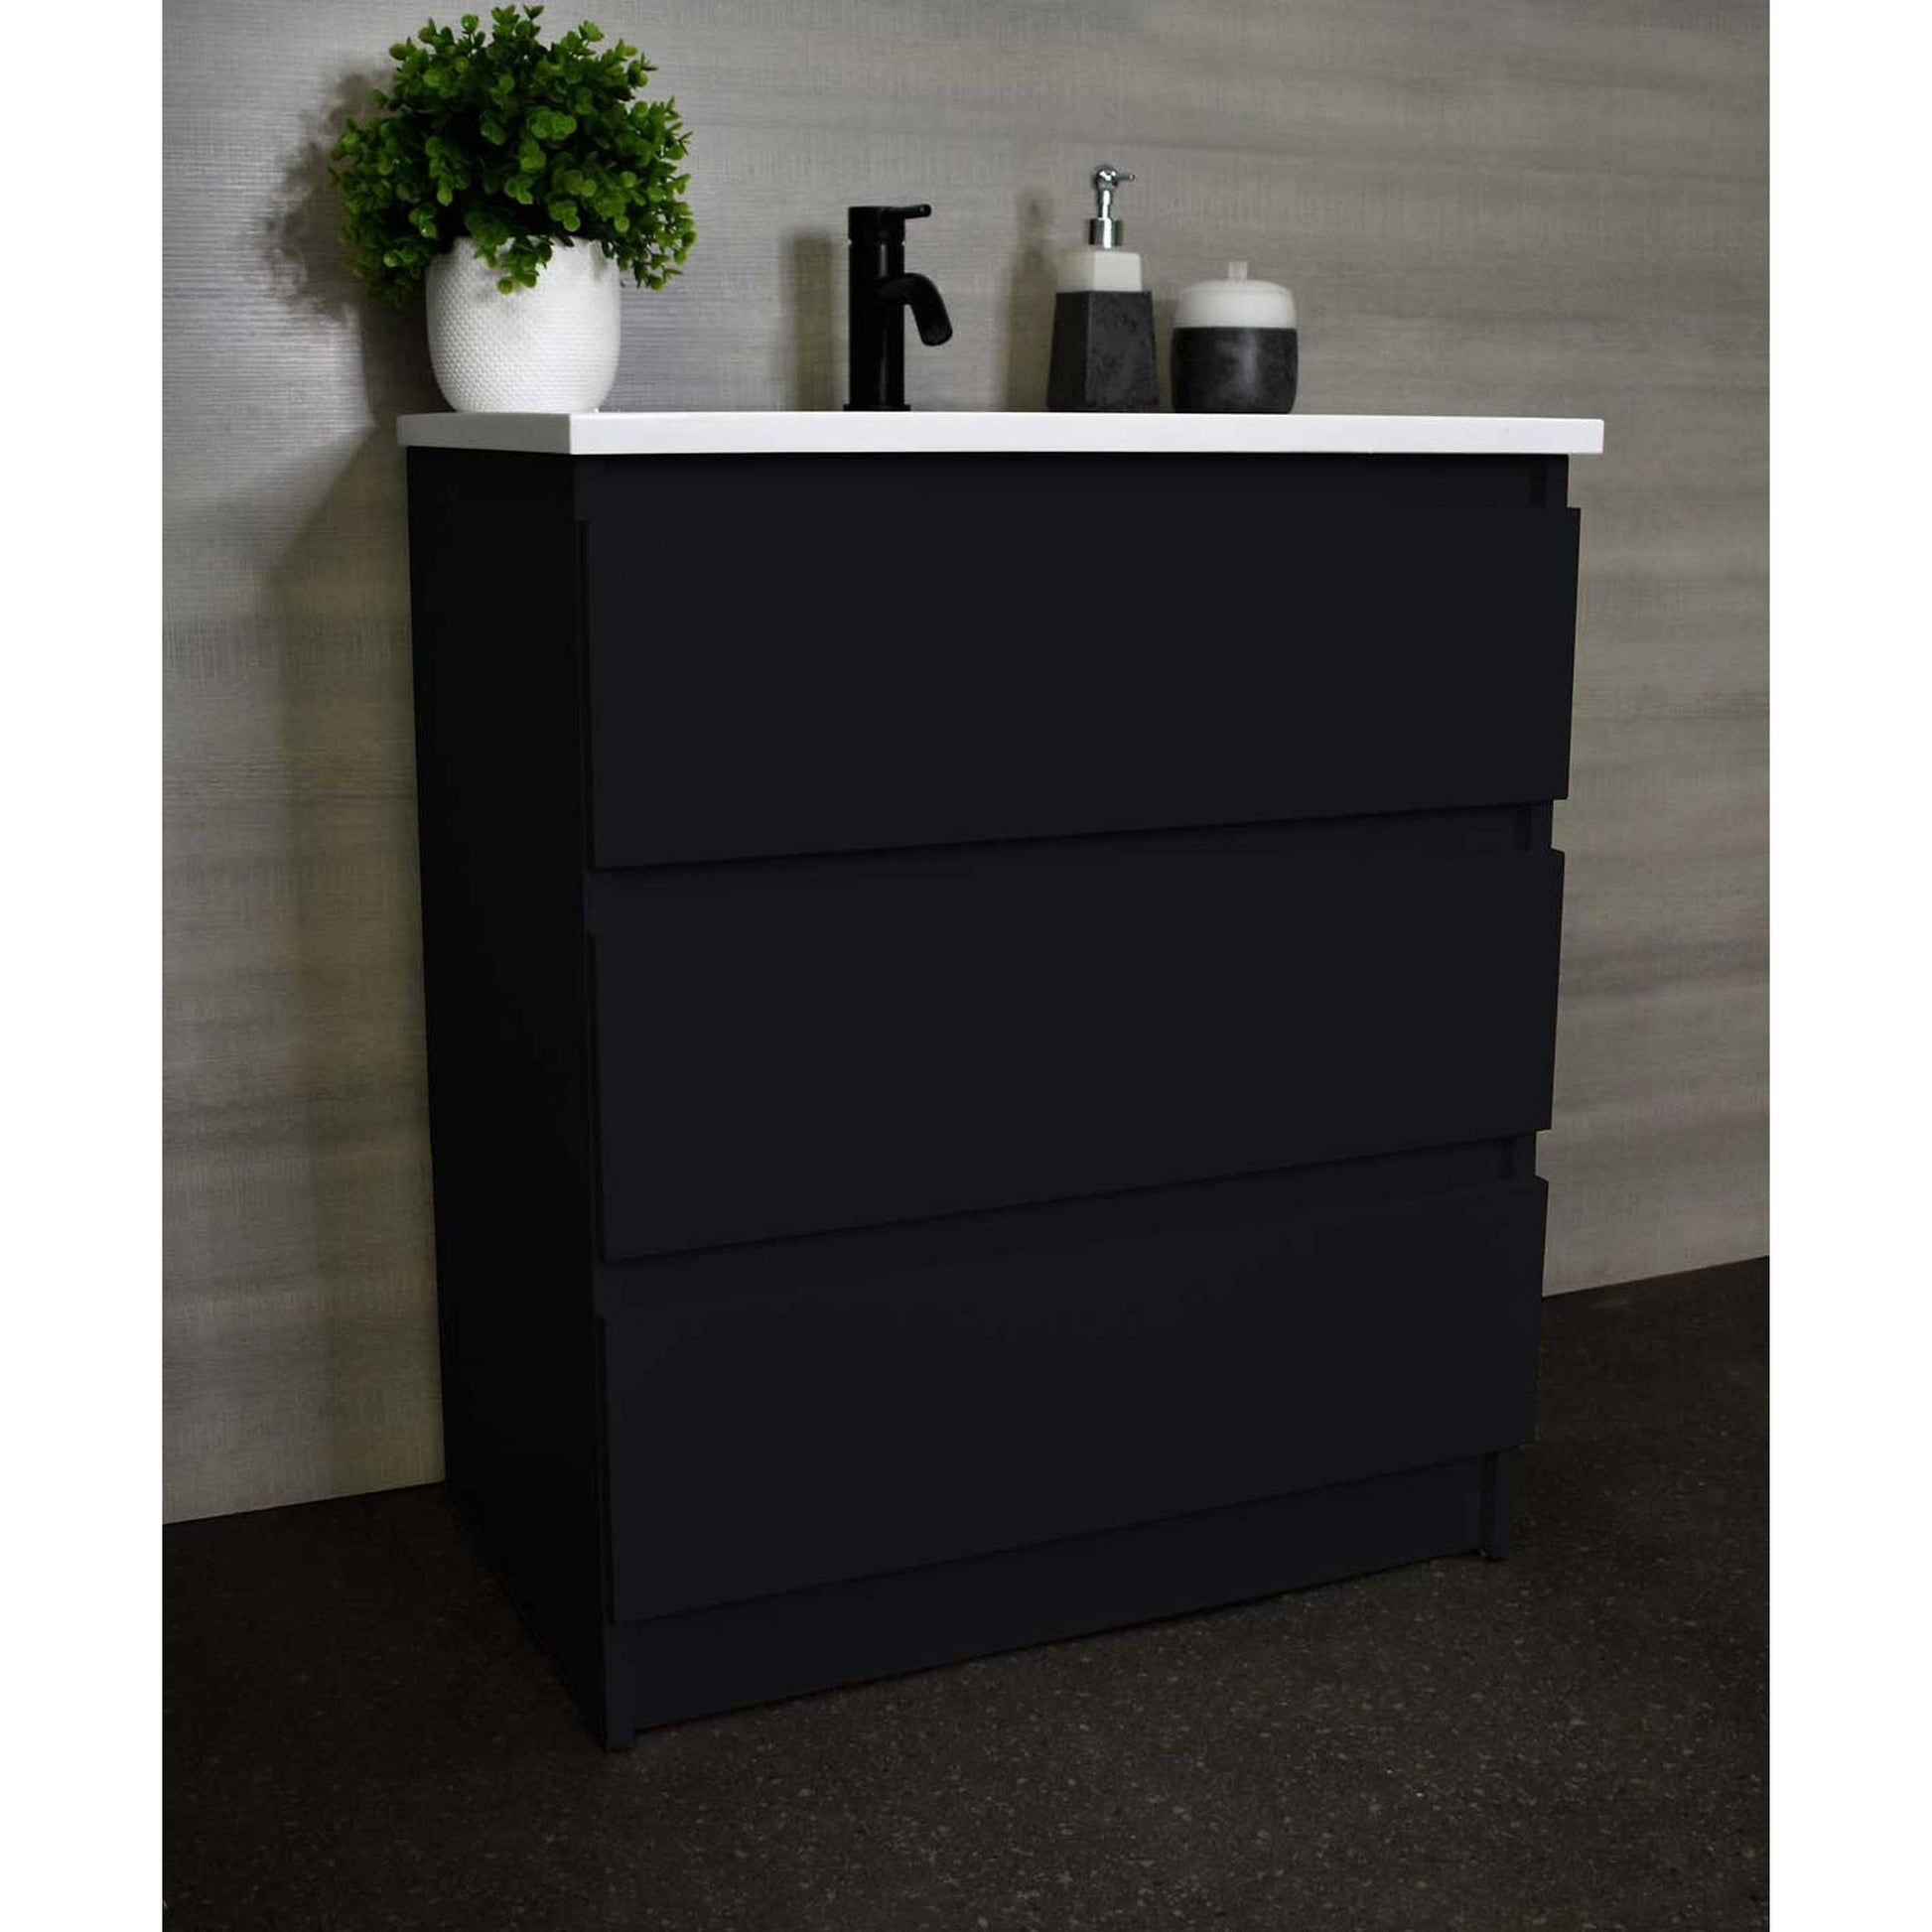 Volpa USA Pepper 30" x 20" Glossy Black Modern Freestanding Bathroom Vanity With Acrylic Top, Integrated Acrylic Sink and drawers